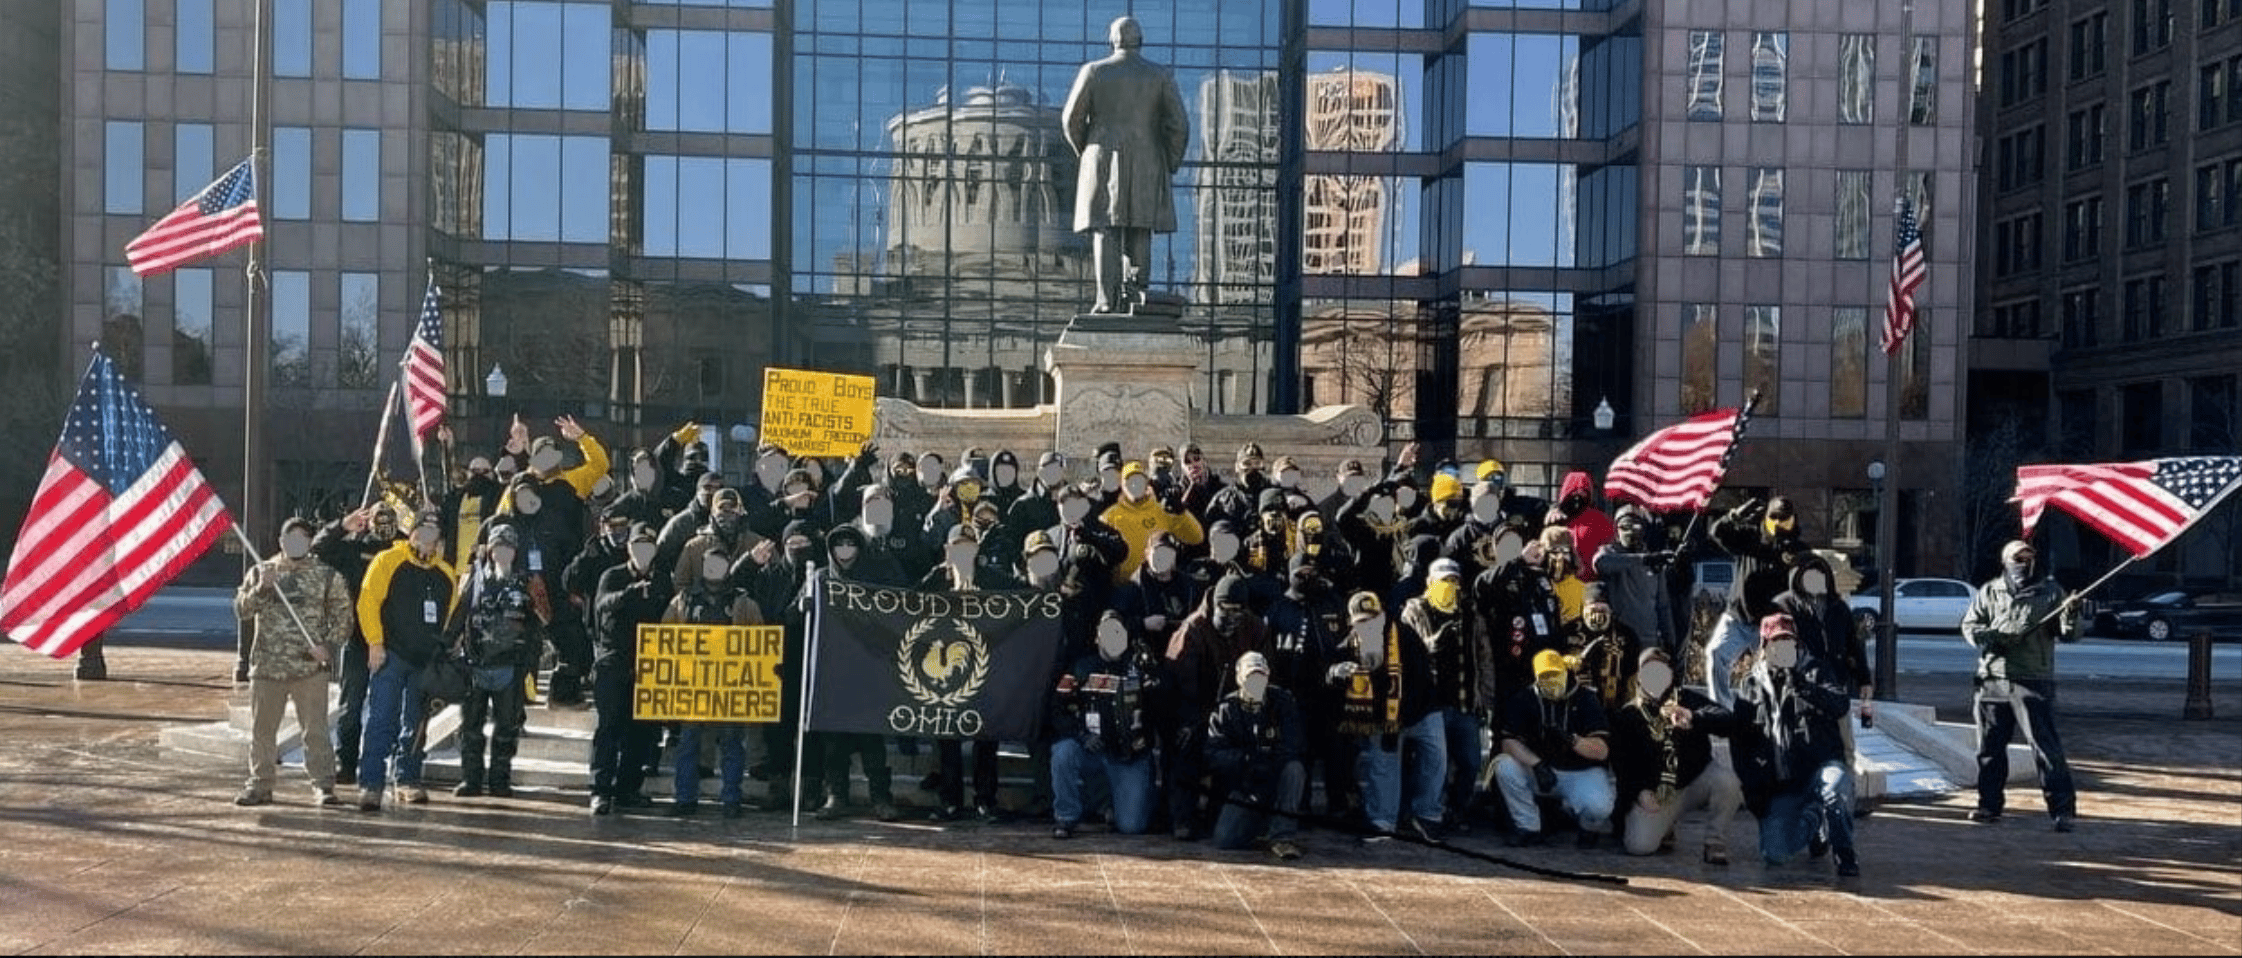 80 Proud Boys Rally Outside Ohio Statehouse to Commemorate 'Murder' of Ashli Babbitt During 06 January 2021 Storming of US State Capital Building in Columbus, Ohio, United States - 08 January 2022